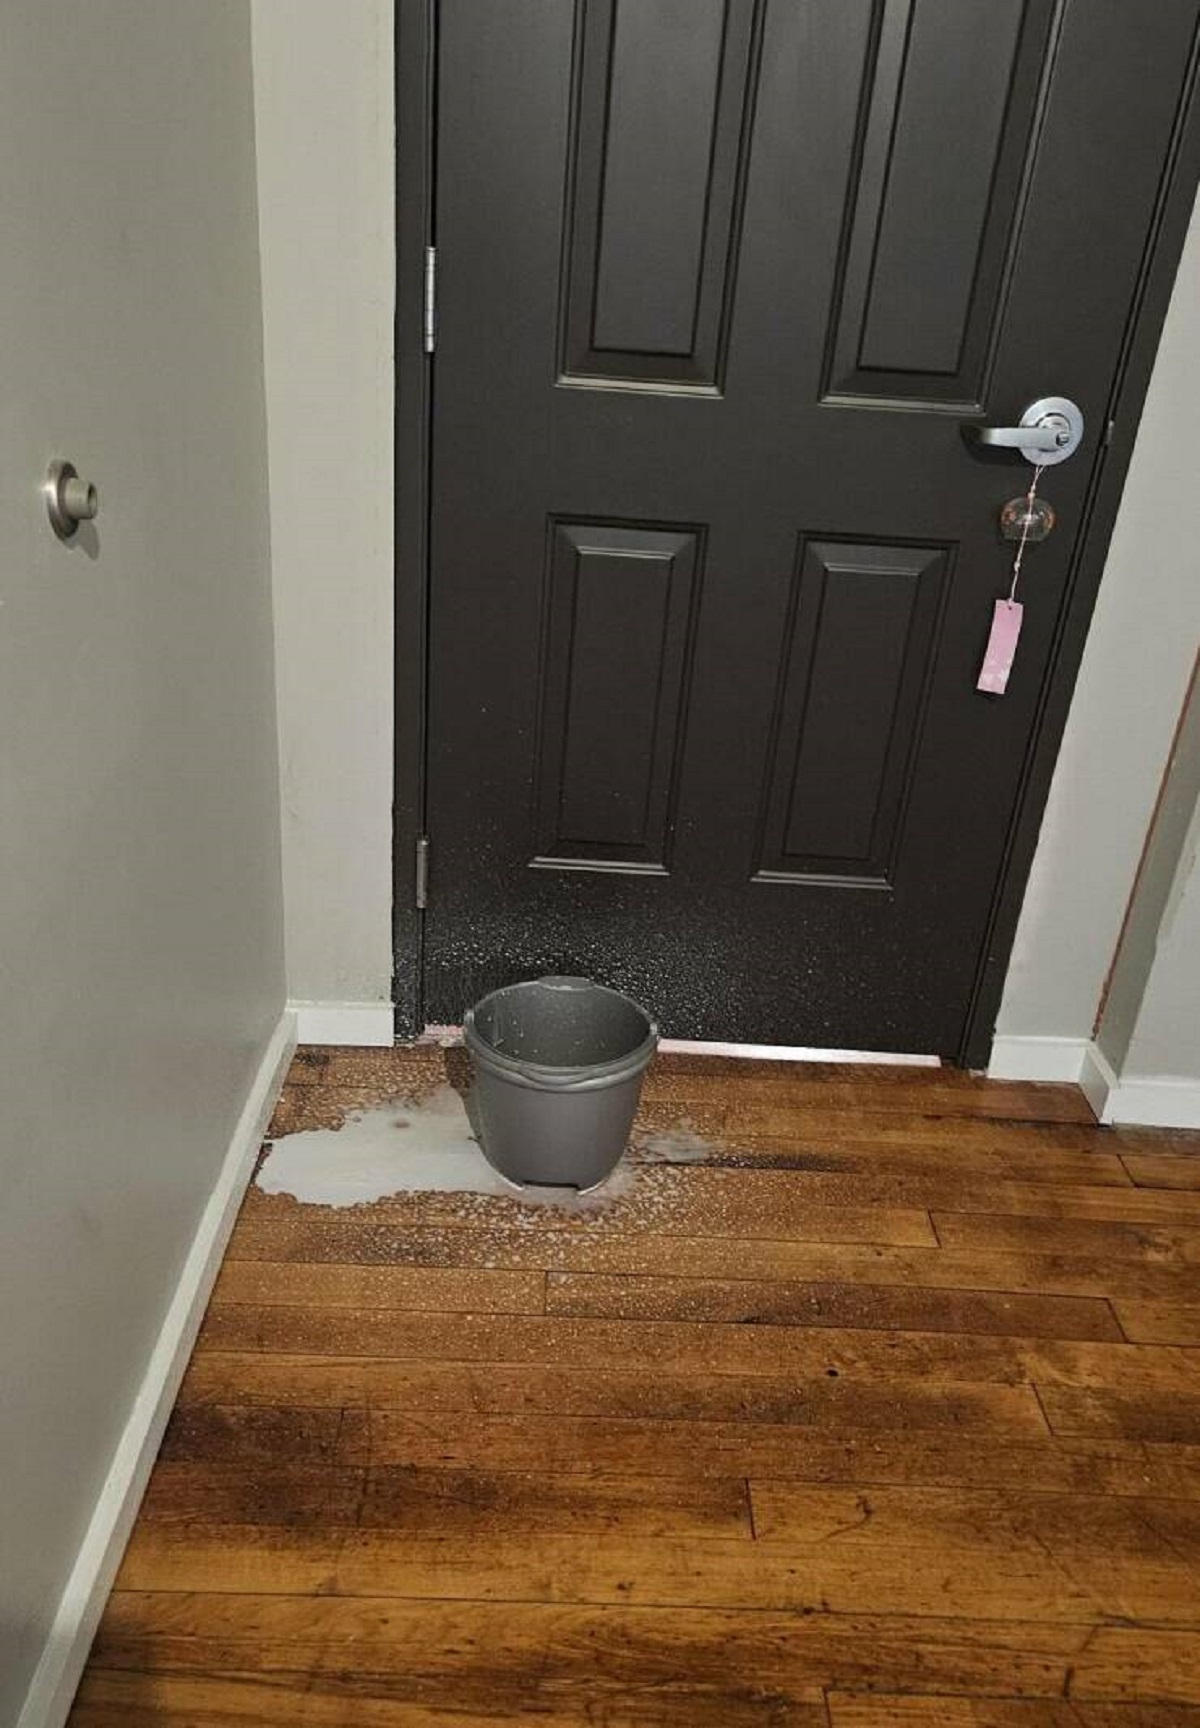 "My upstairs neighbor dropped a quart of milk and it's dripping into my apartment"